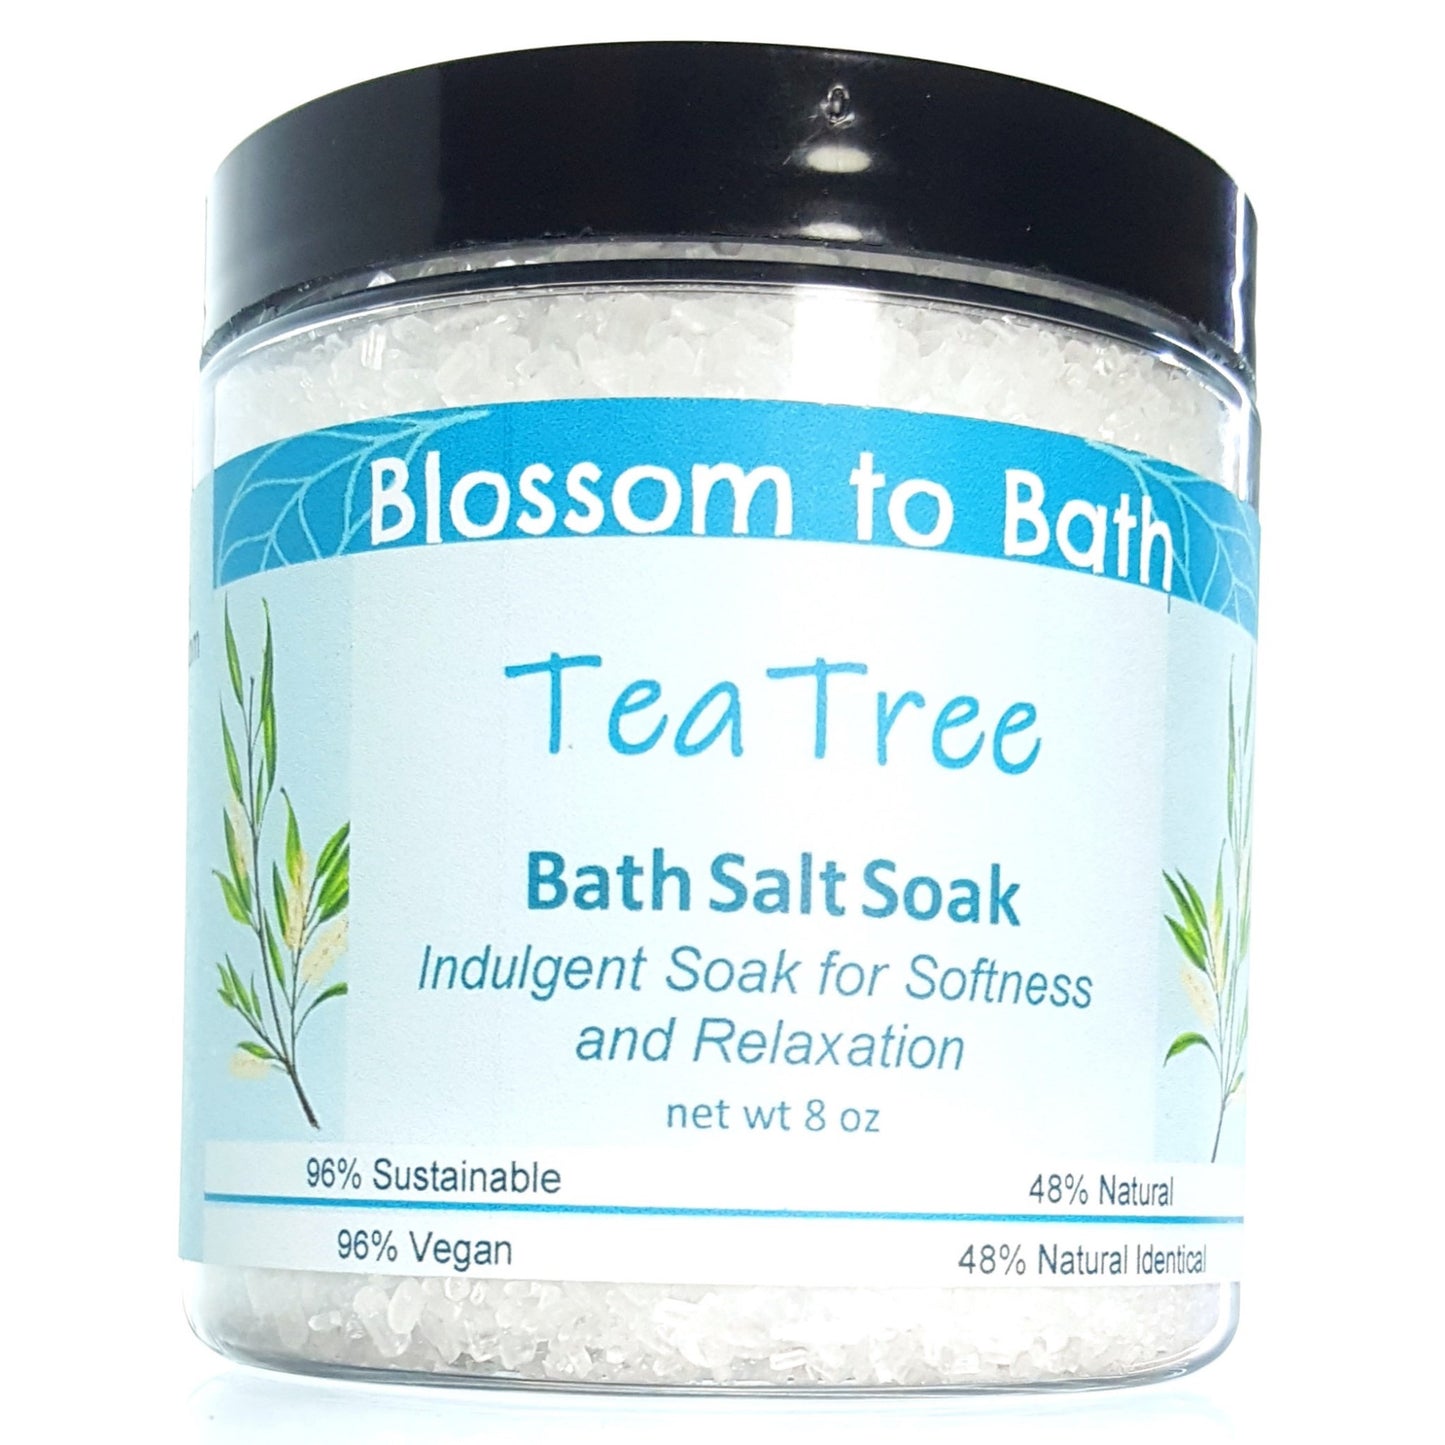 Buy Blossom to Bath Tea Tree Bath Salt Soak from Flowersong Soap Studio.  Scented epsom salts for a luxurious soaking experience  Tea tree's fresh fragrance embodies a deep down clean.